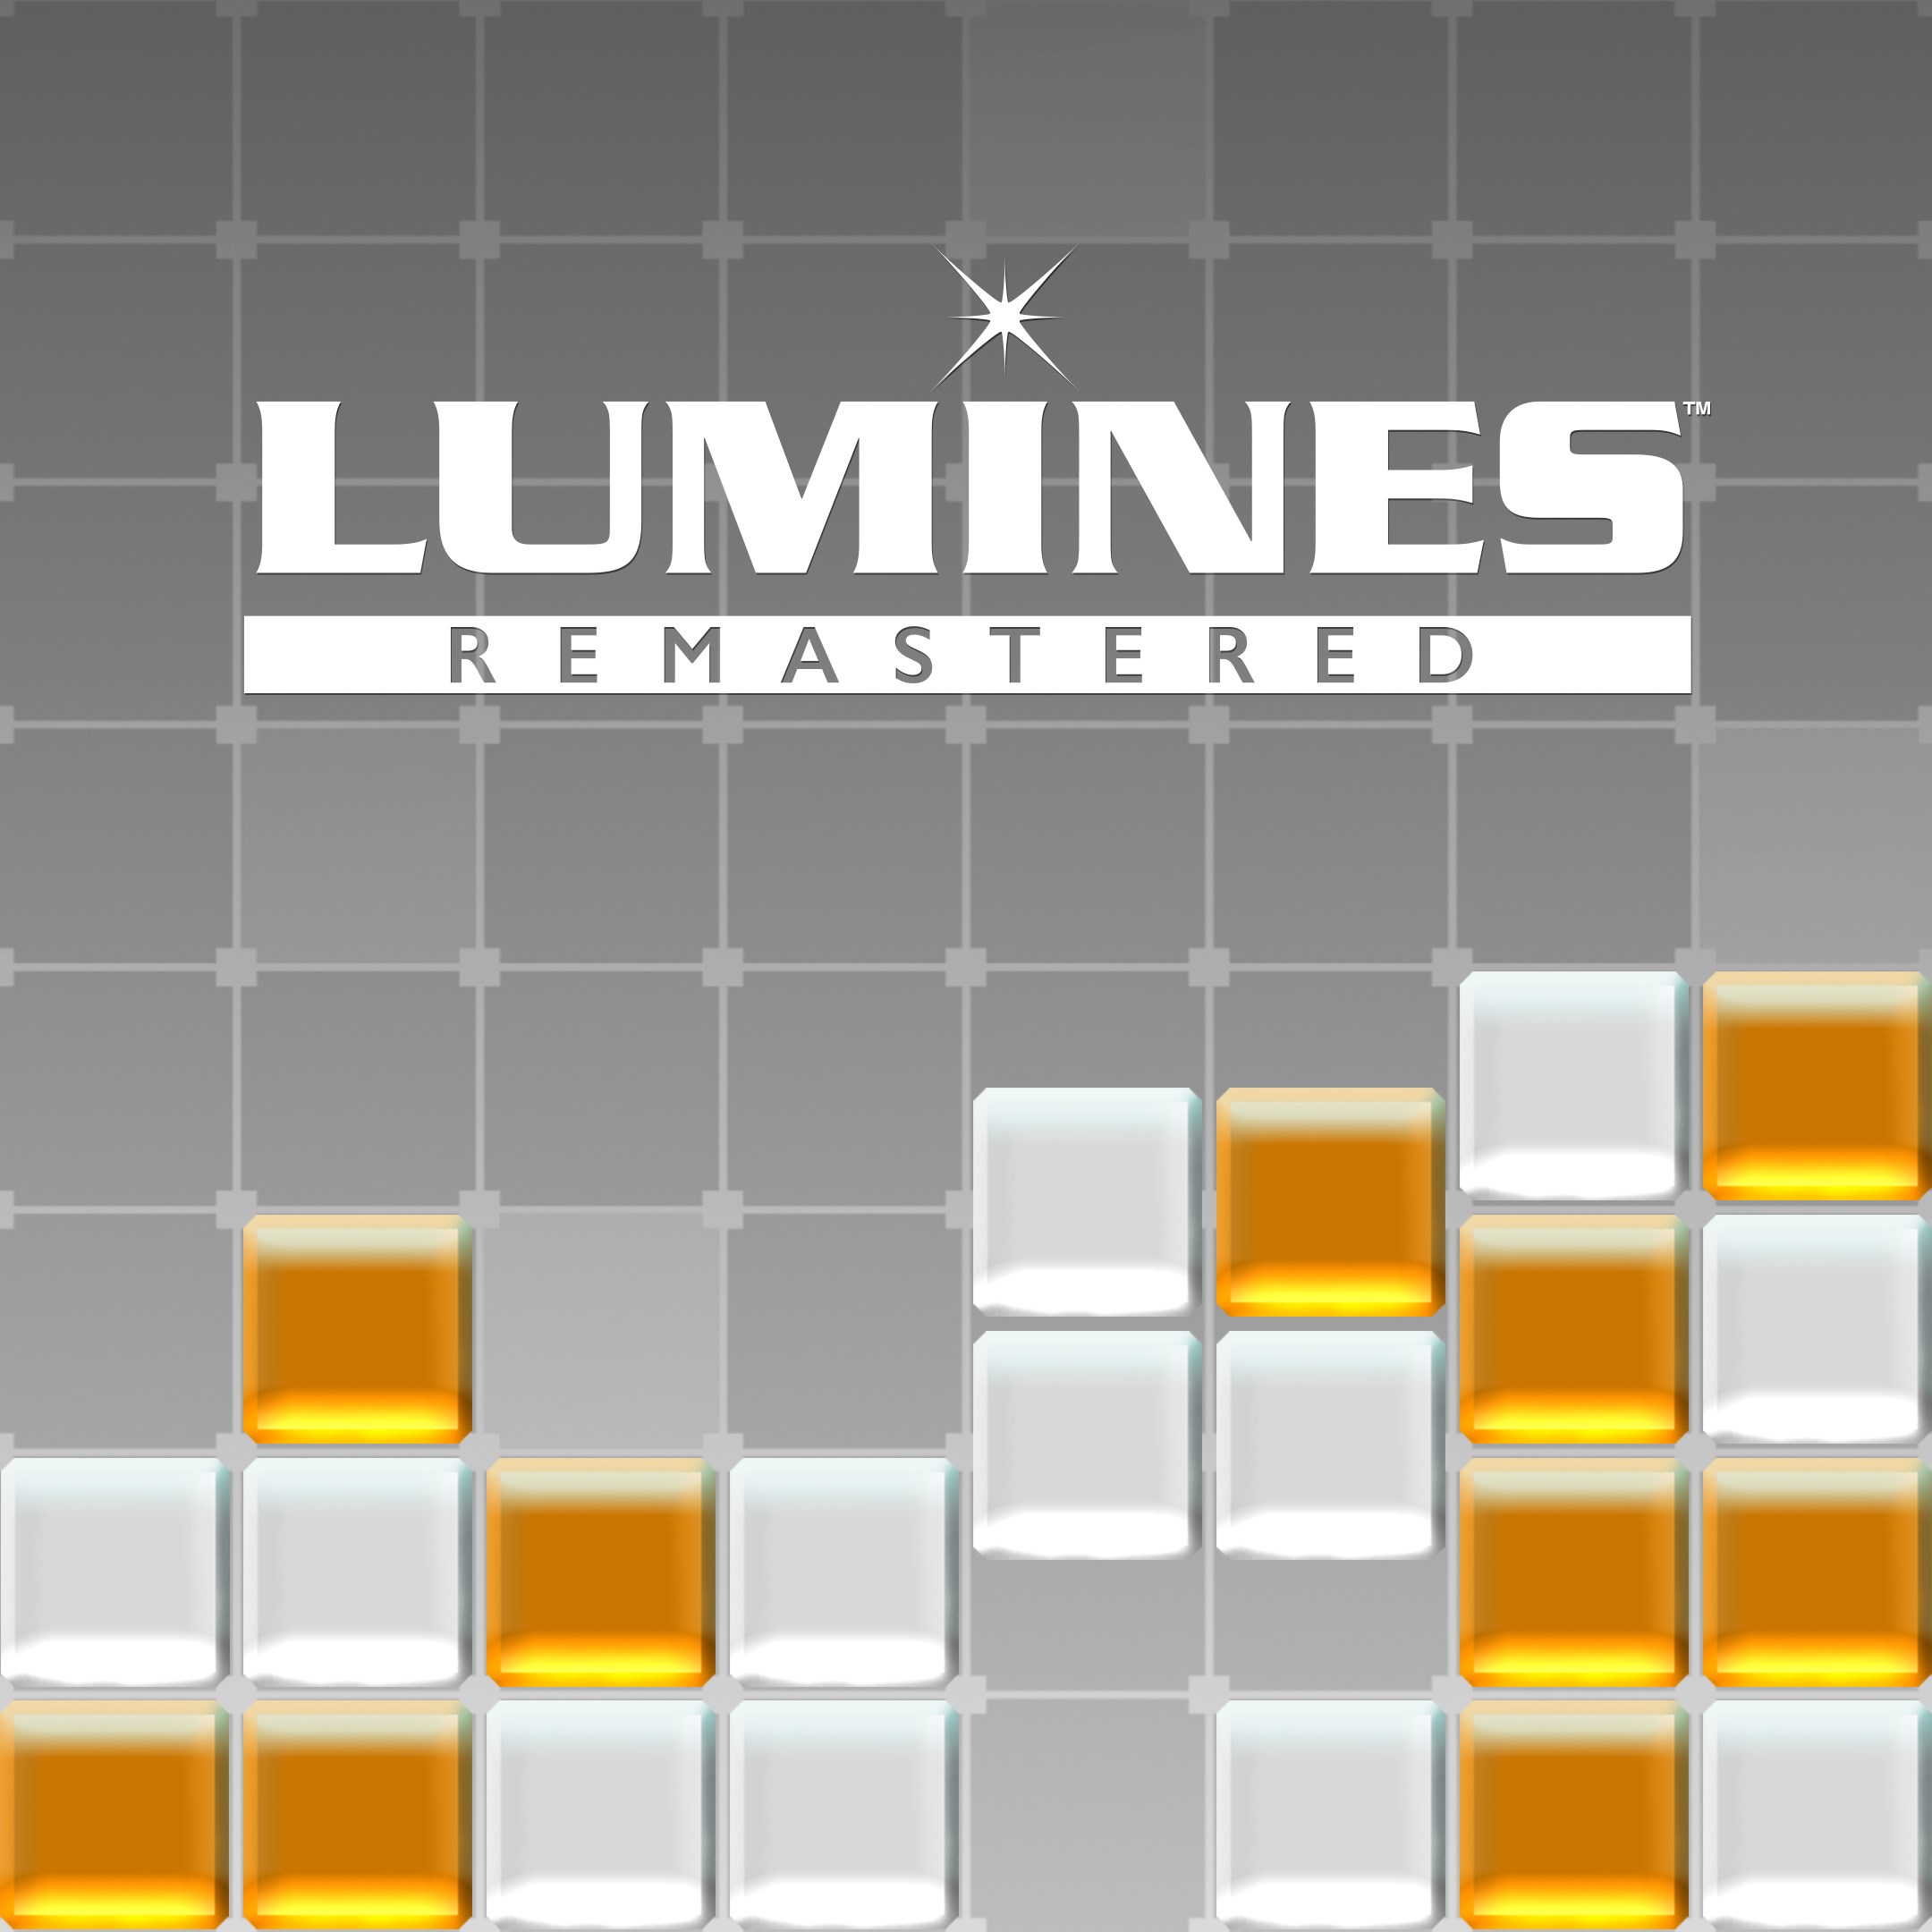 LUMINES REMASTERED technical specifications for laptop